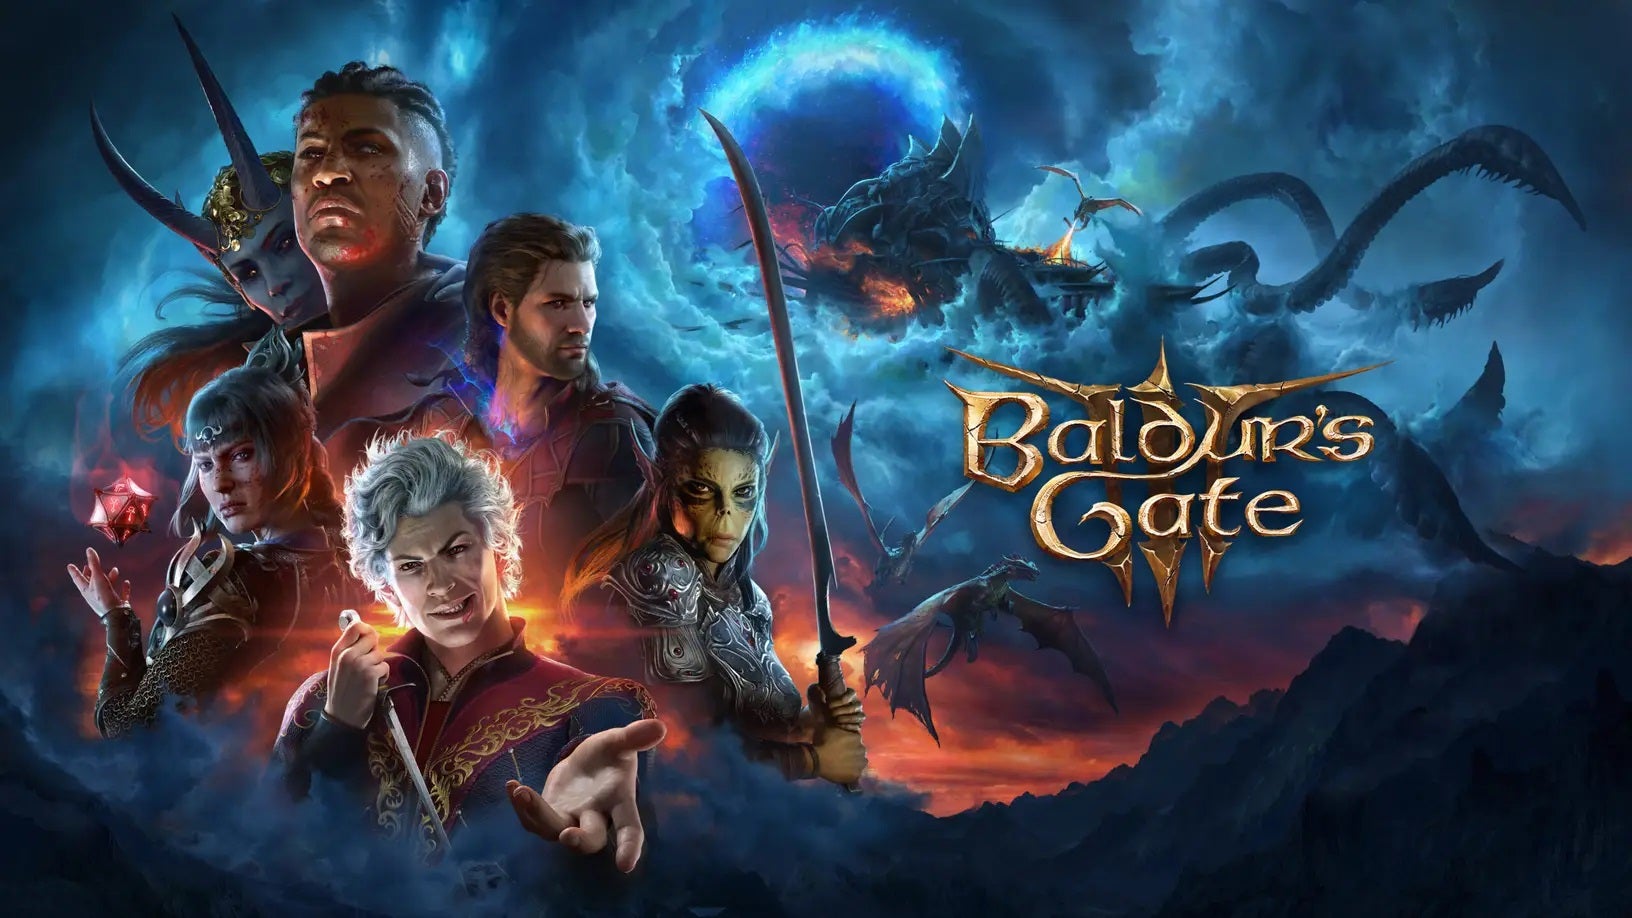 The cast of Baldur's Gate 3 in front of a gigantic squid-armed emerging from a hole in the sky with a dragon breathing fire on it